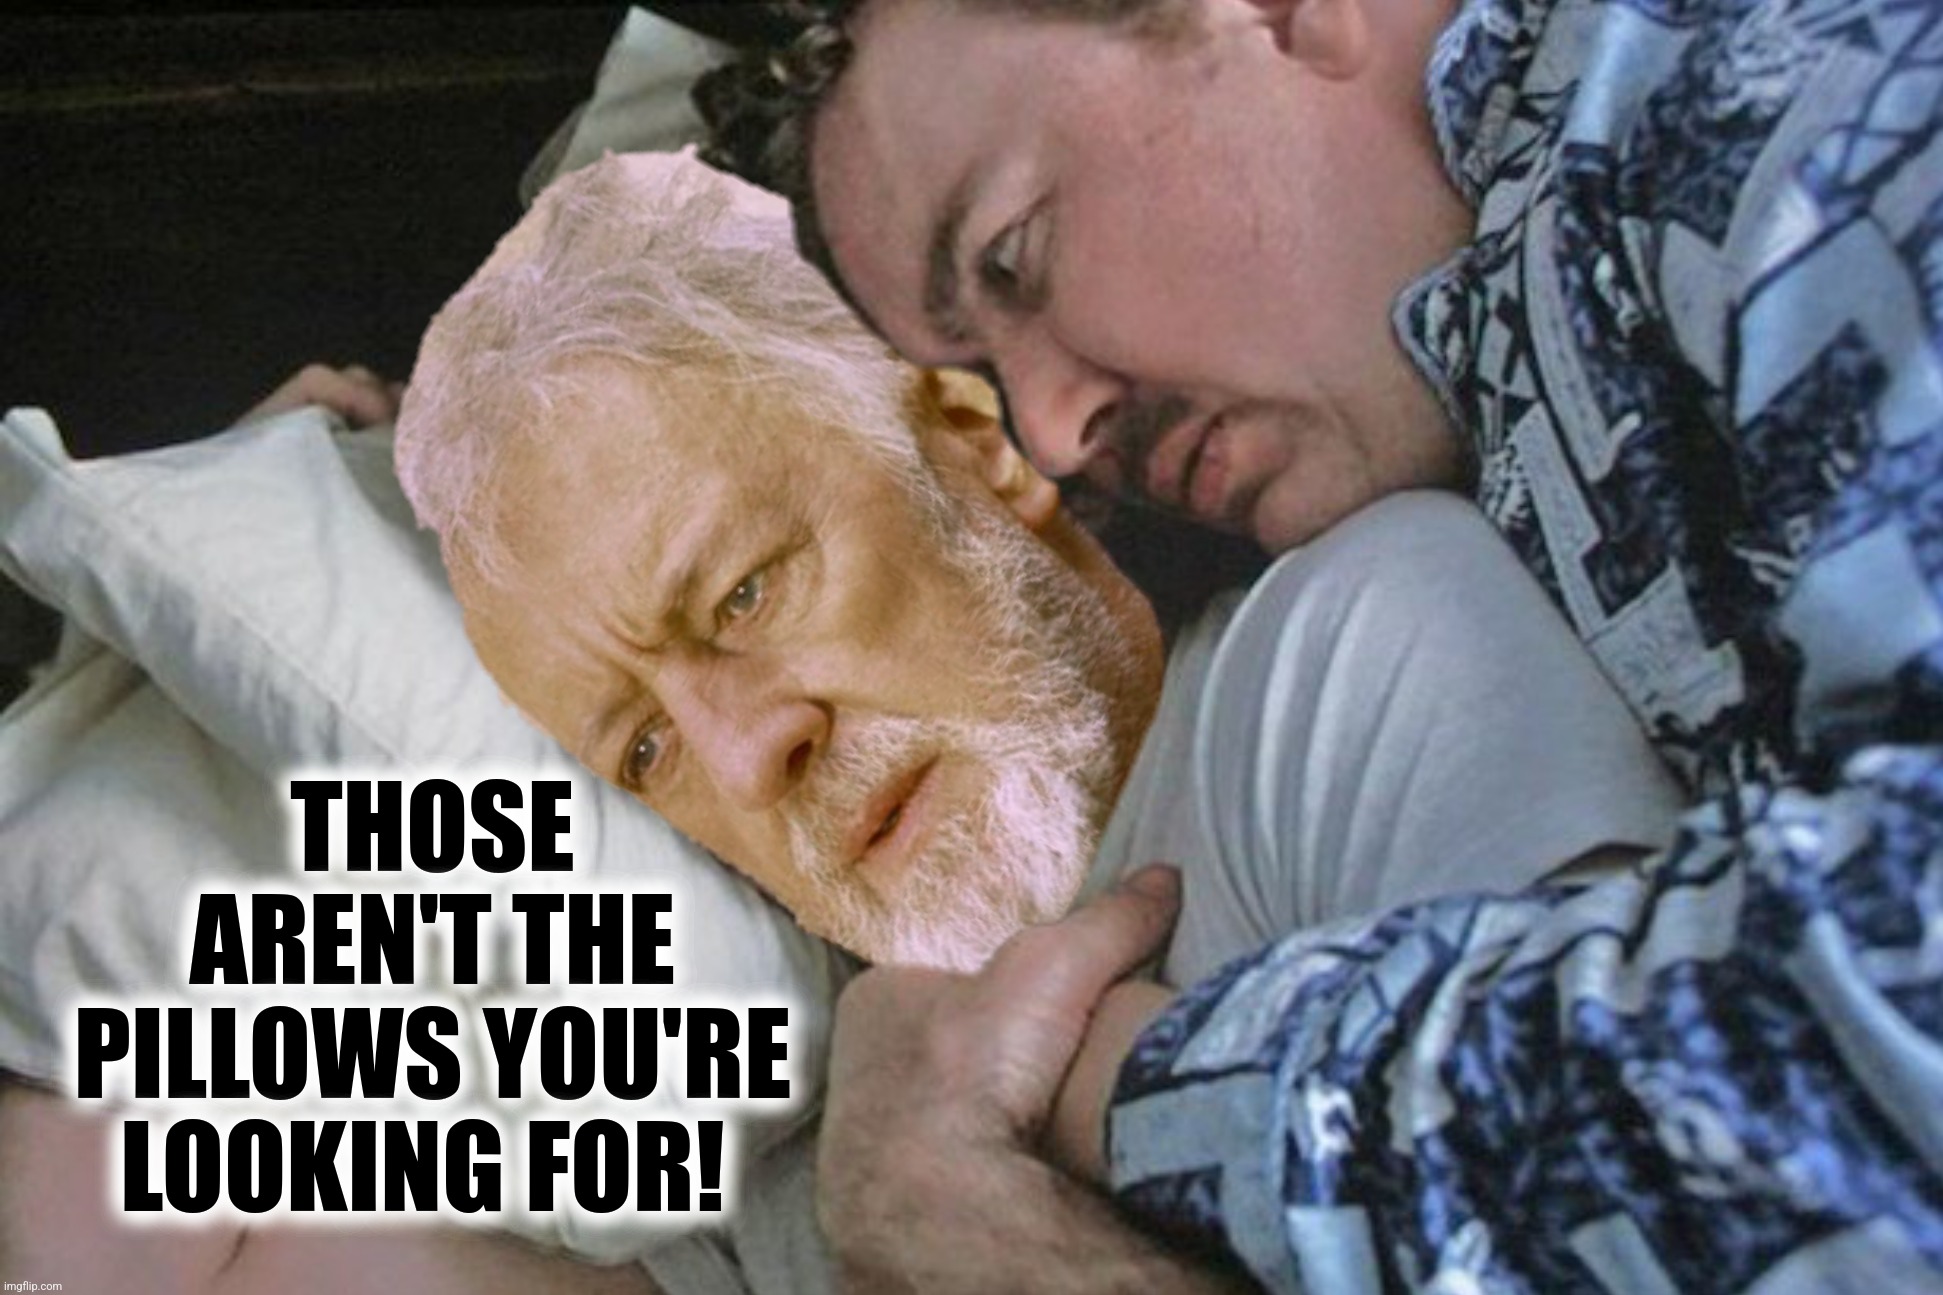 The Dark Side (Submission suggested by jdatesta) | THOSE AREN'T THE PILLOWS YOU'RE LOOKING FOR! | image tagged in bad photoshop,obi wan kenobi,planes trains and automobiles,pillows | made w/ Imgflip meme maker